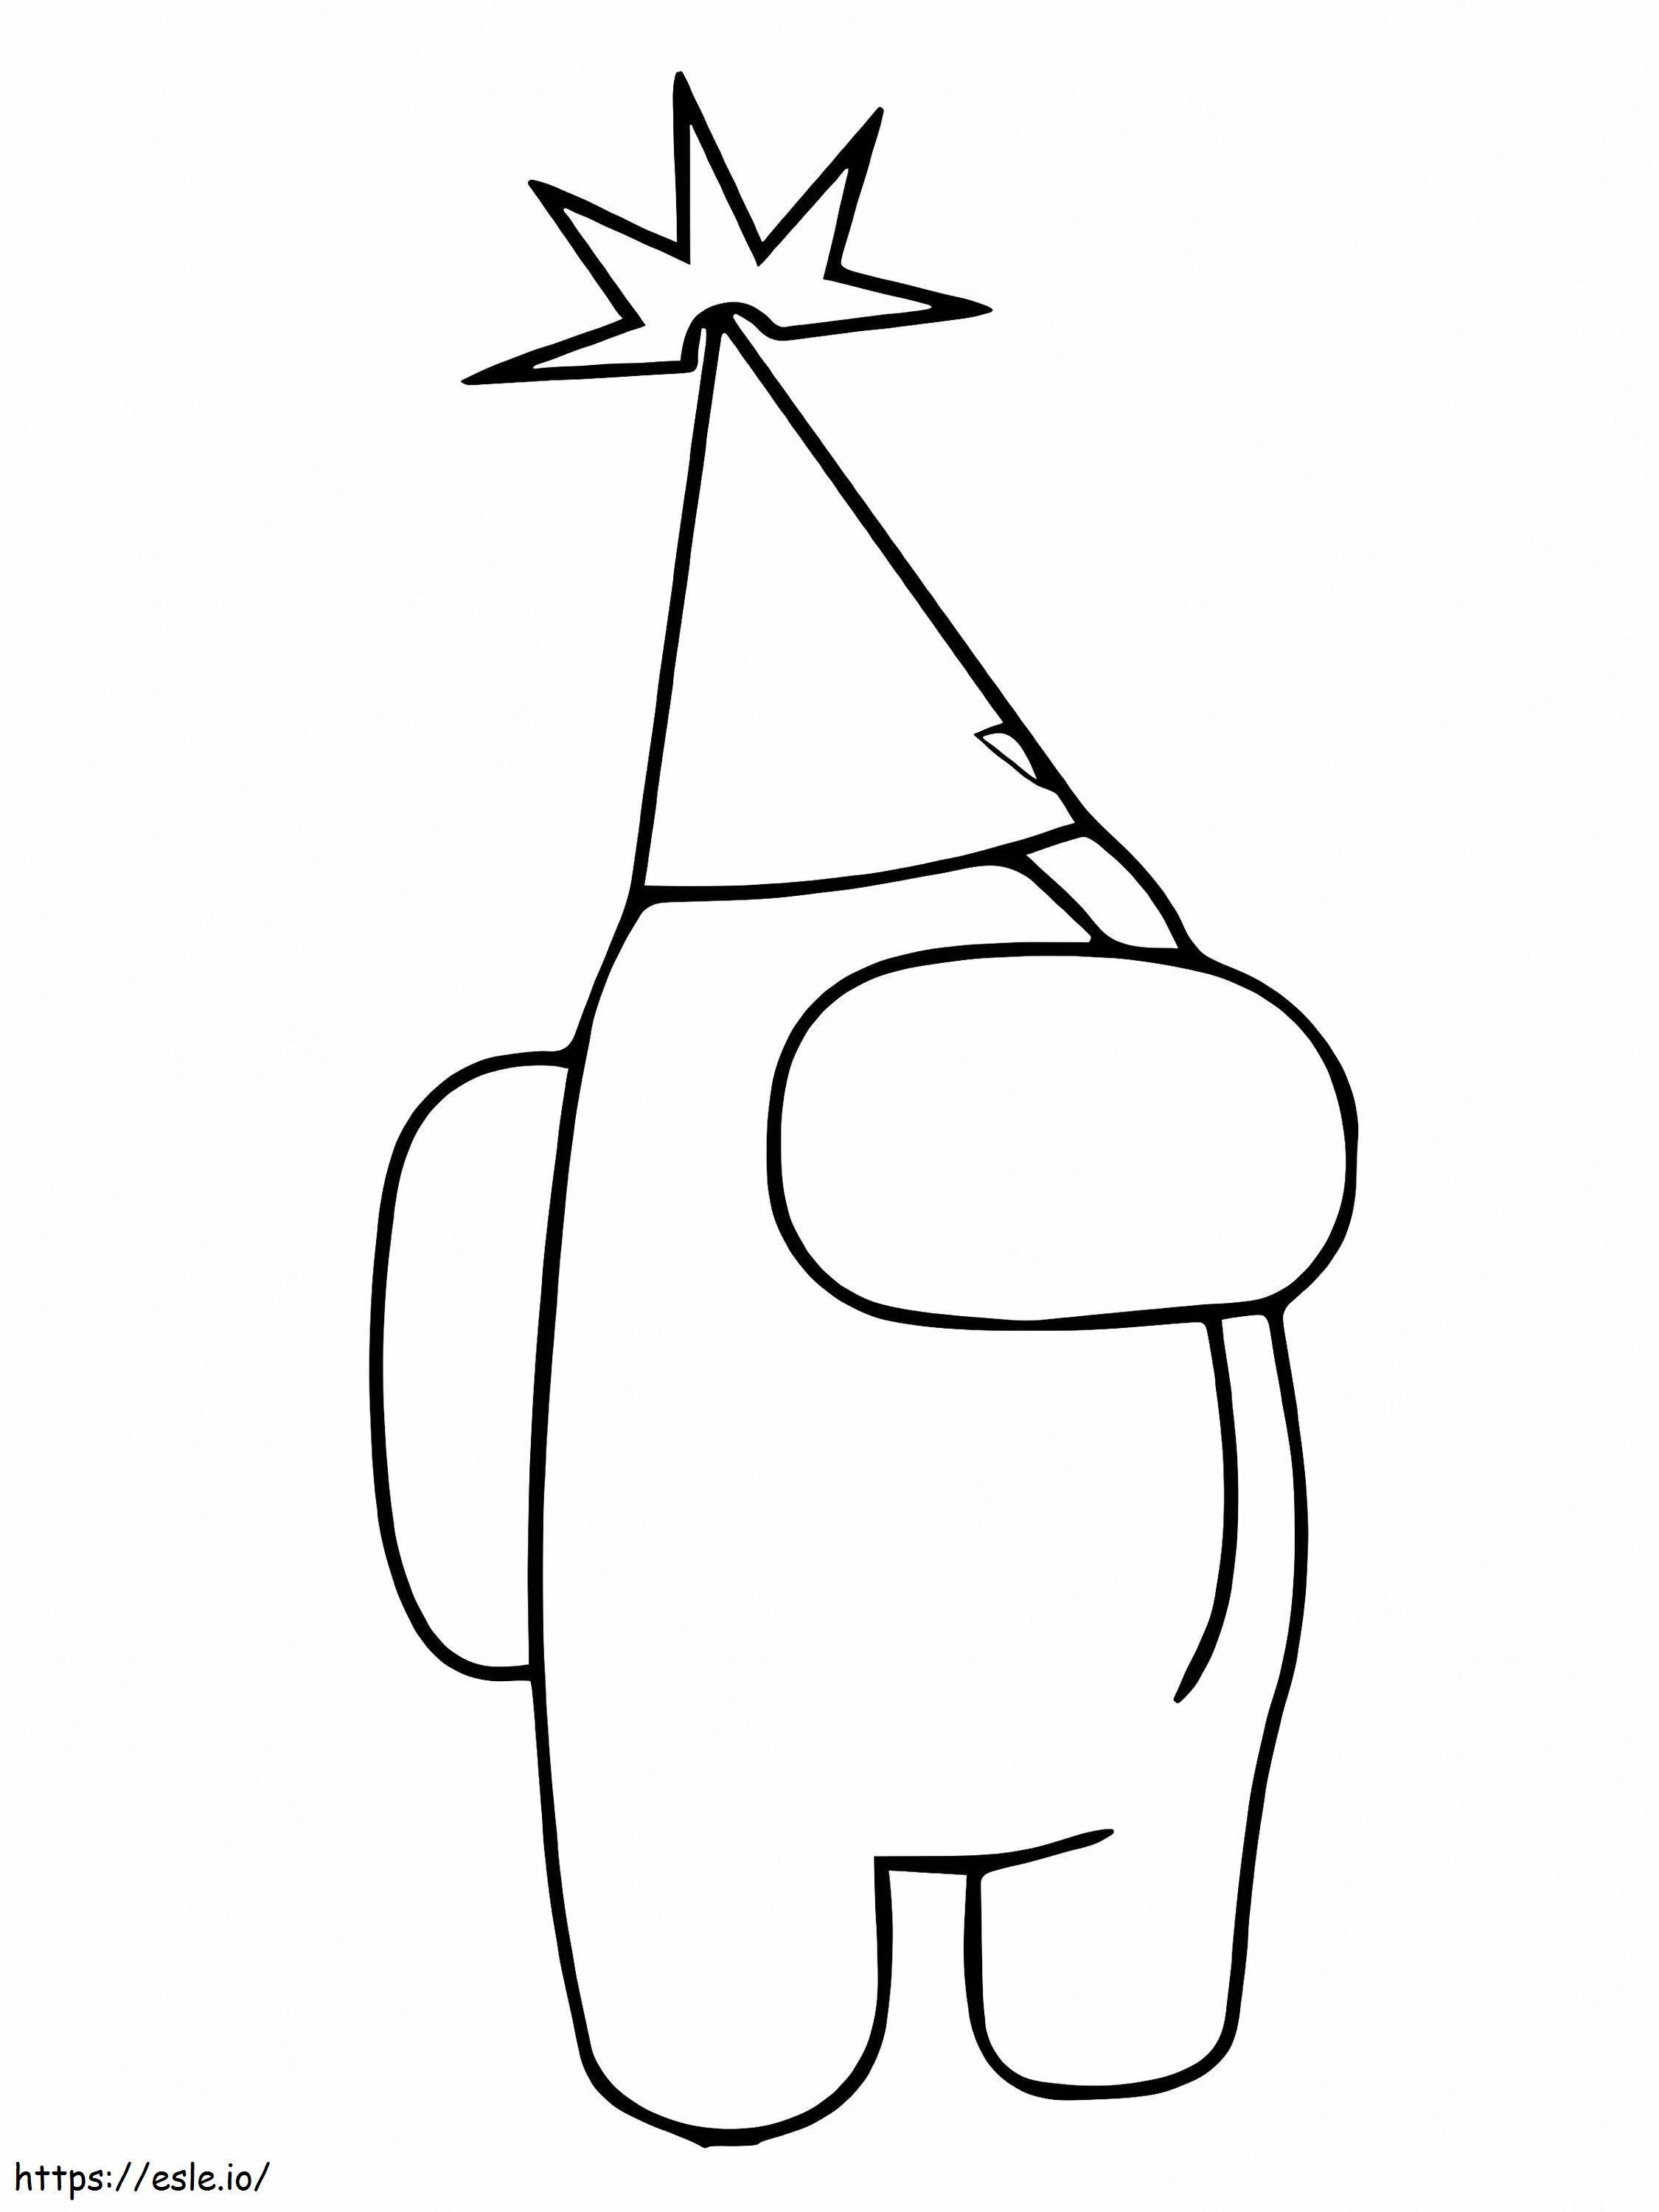 Among Us Christmas Party Hat Coloring Page coloring page